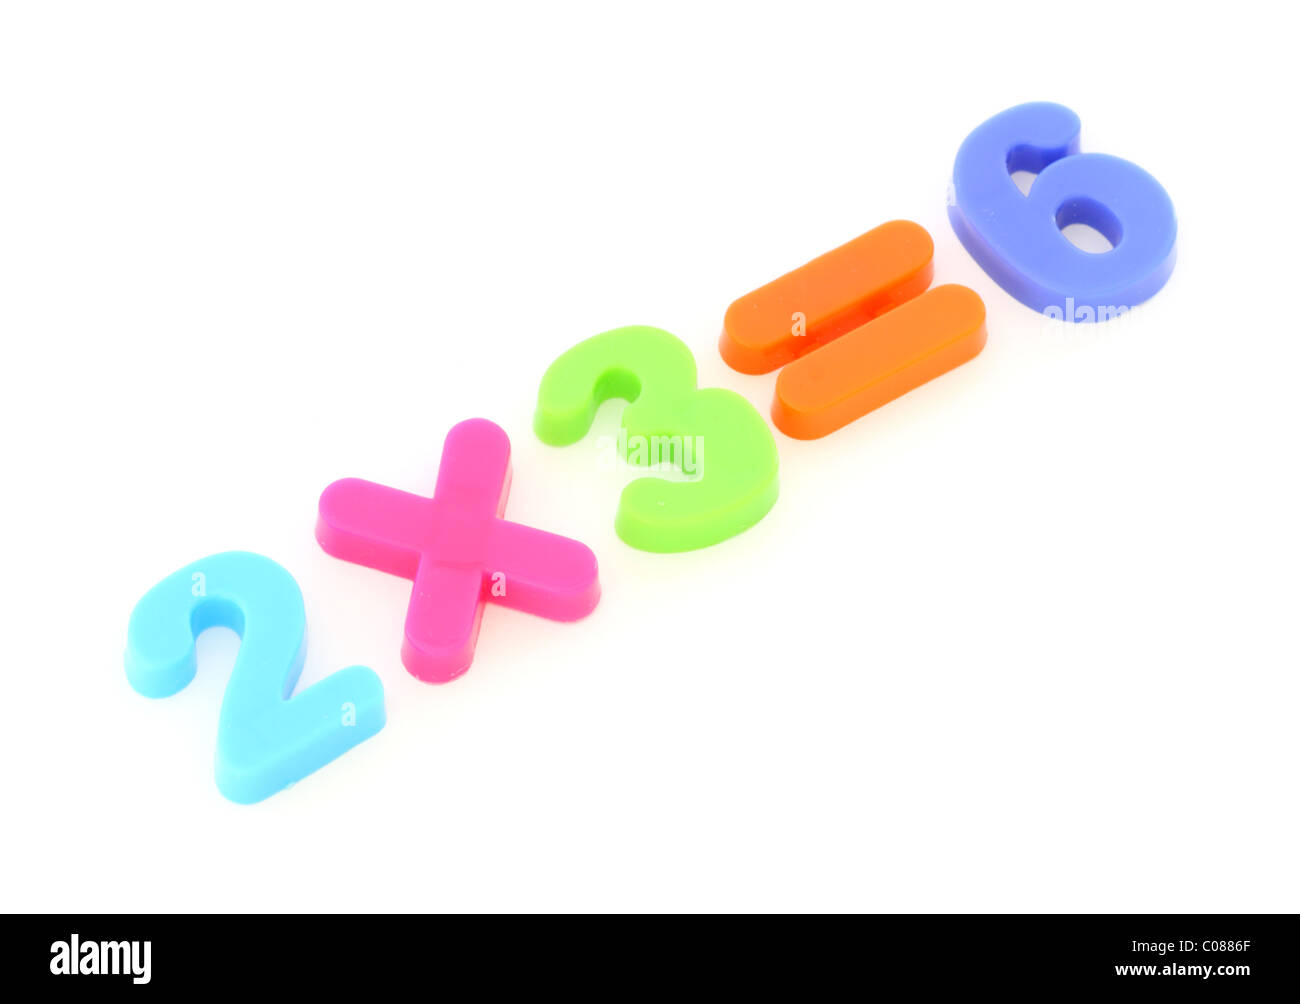 Numbers formed from plastic colourful toy digits on white background Stock Photo